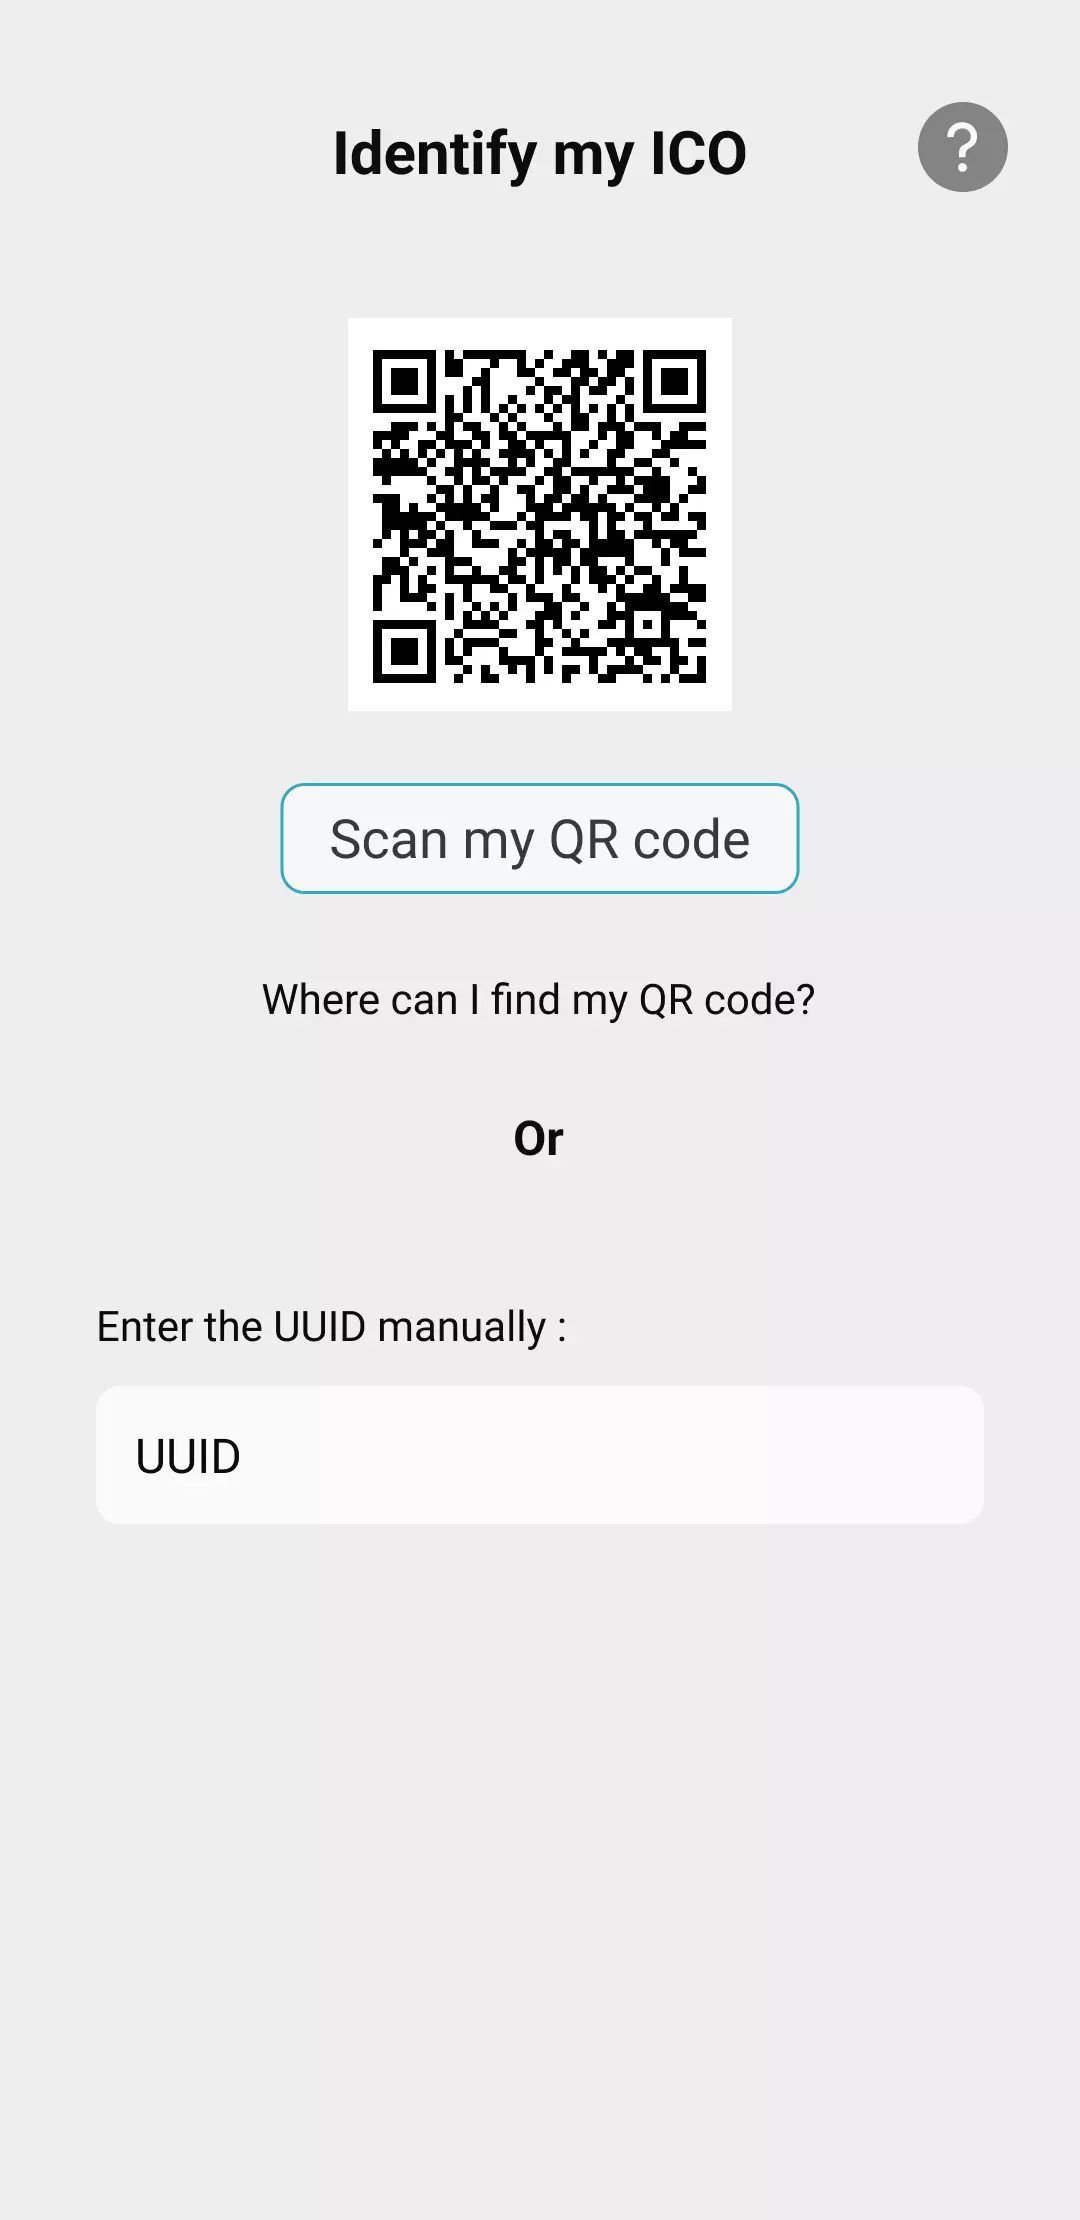 Visual of the ICO application with the interface with the process to identify its ICO thanks to a QR code or with the UUID